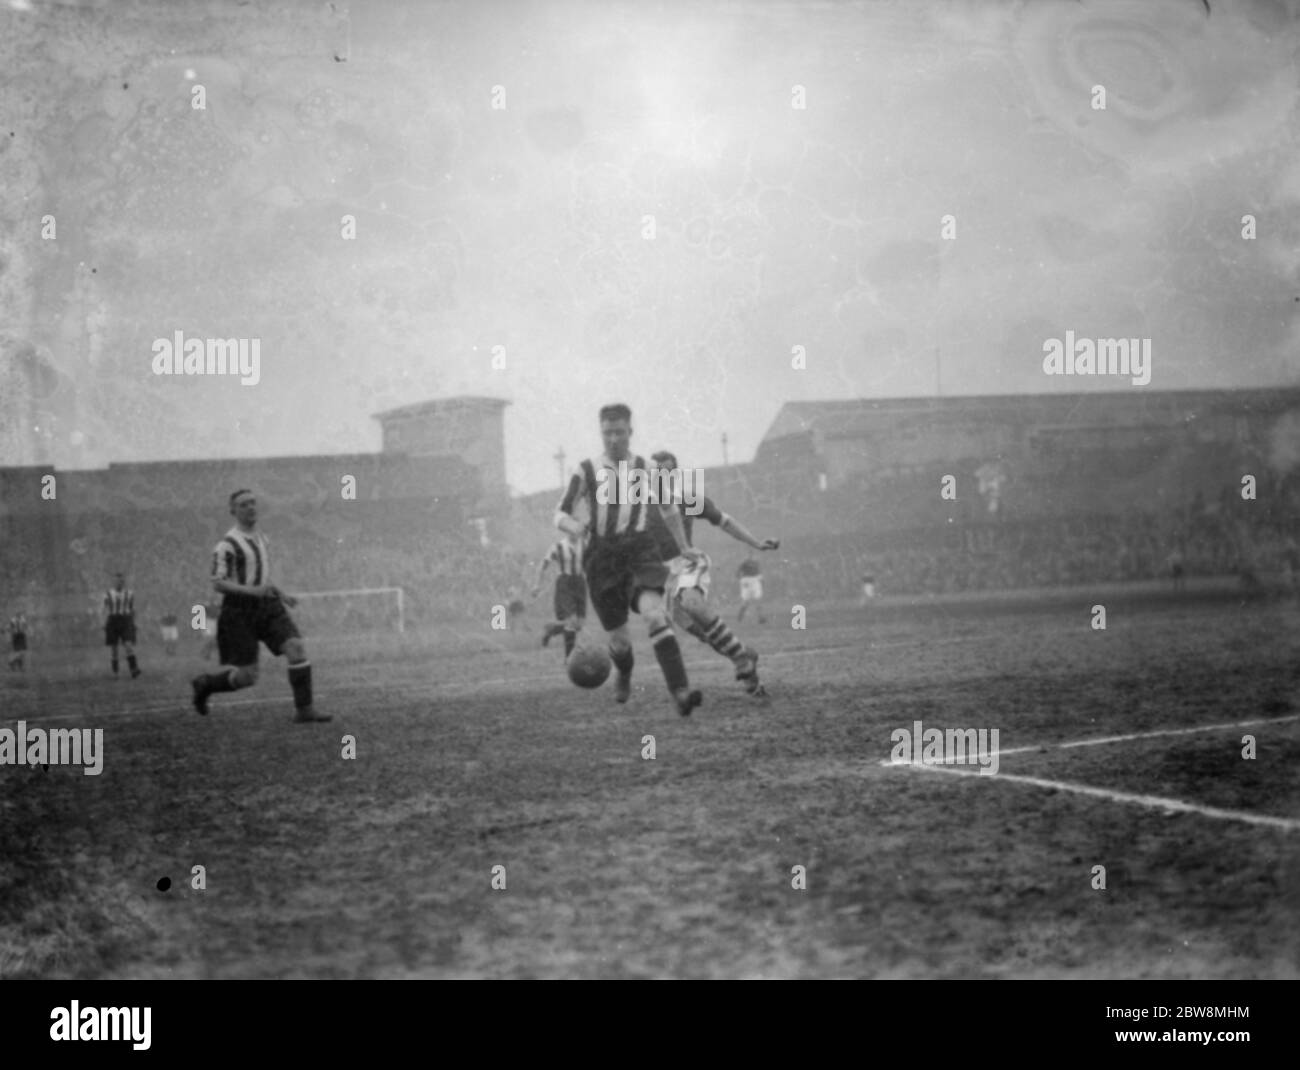 Millwall football club versus Notts County Football club . Two players compete for the ball . 1936 Stock Photo